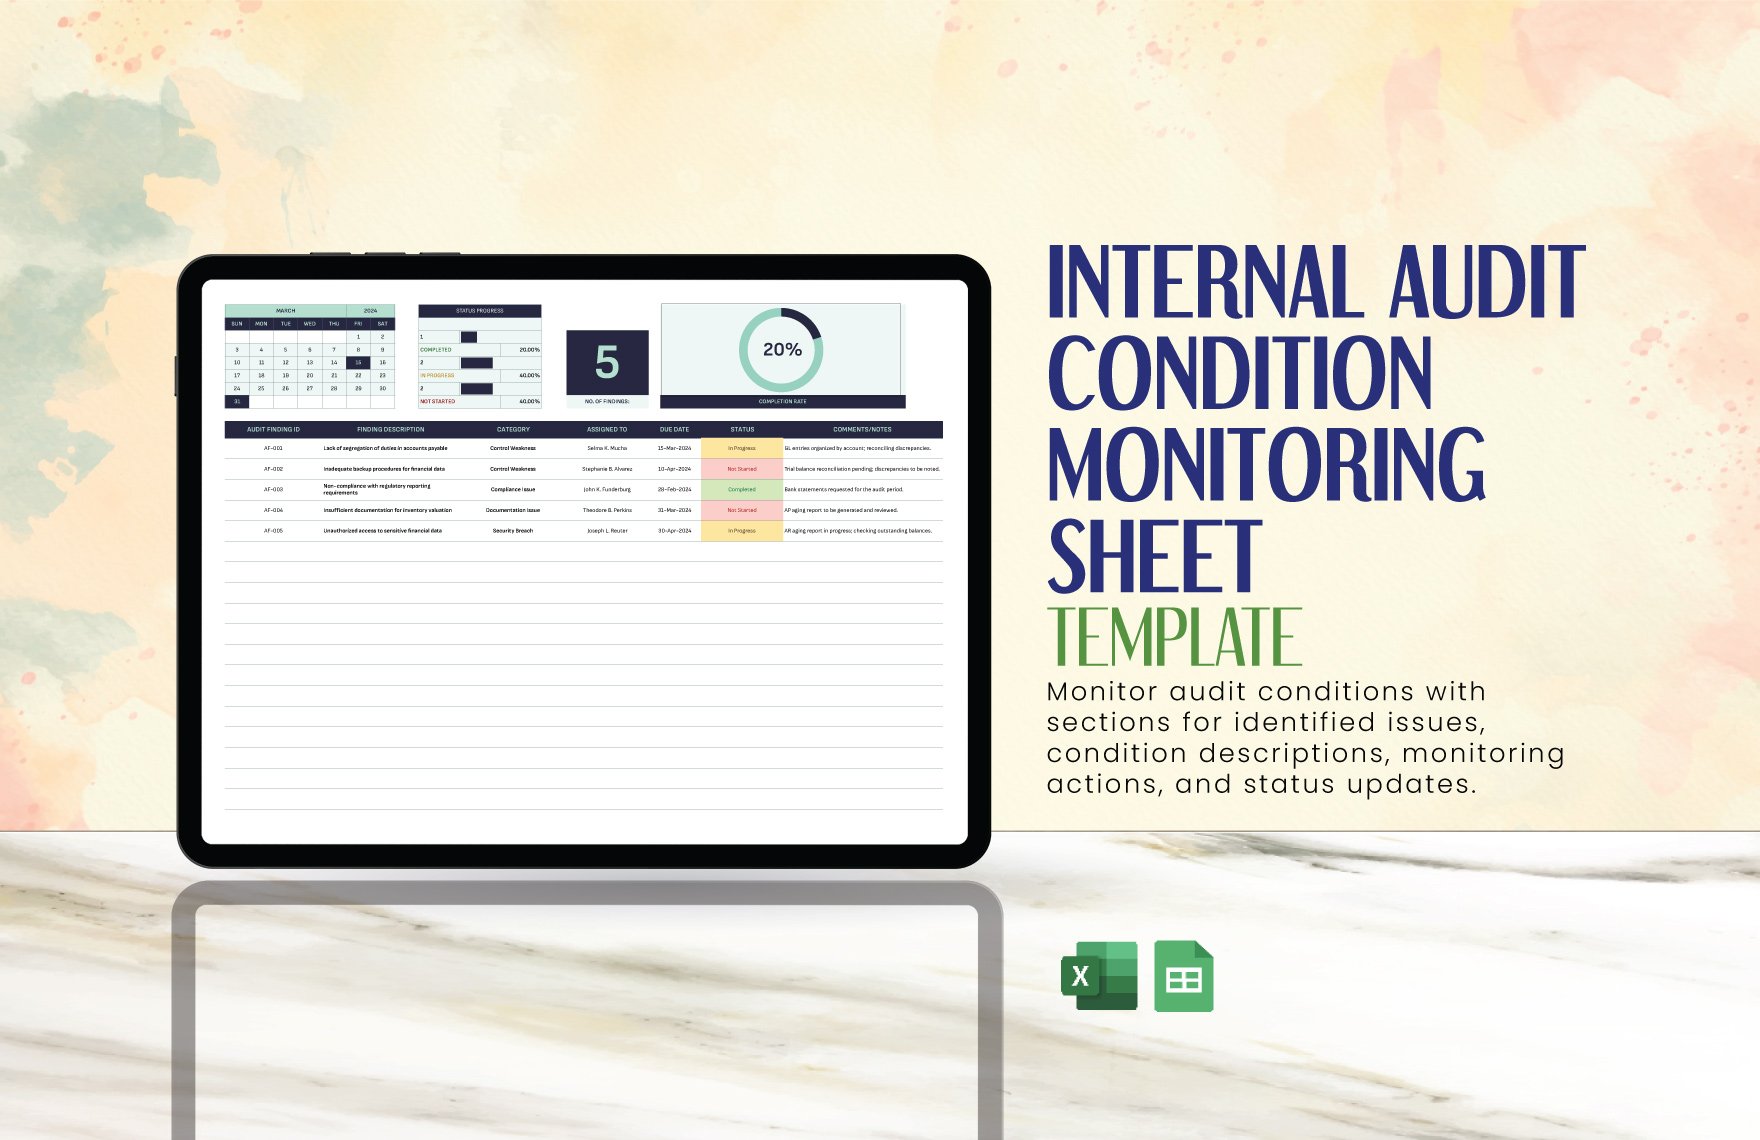 Internal Audit Condition Monitoring Sheet Template in Excel, Google Sheets